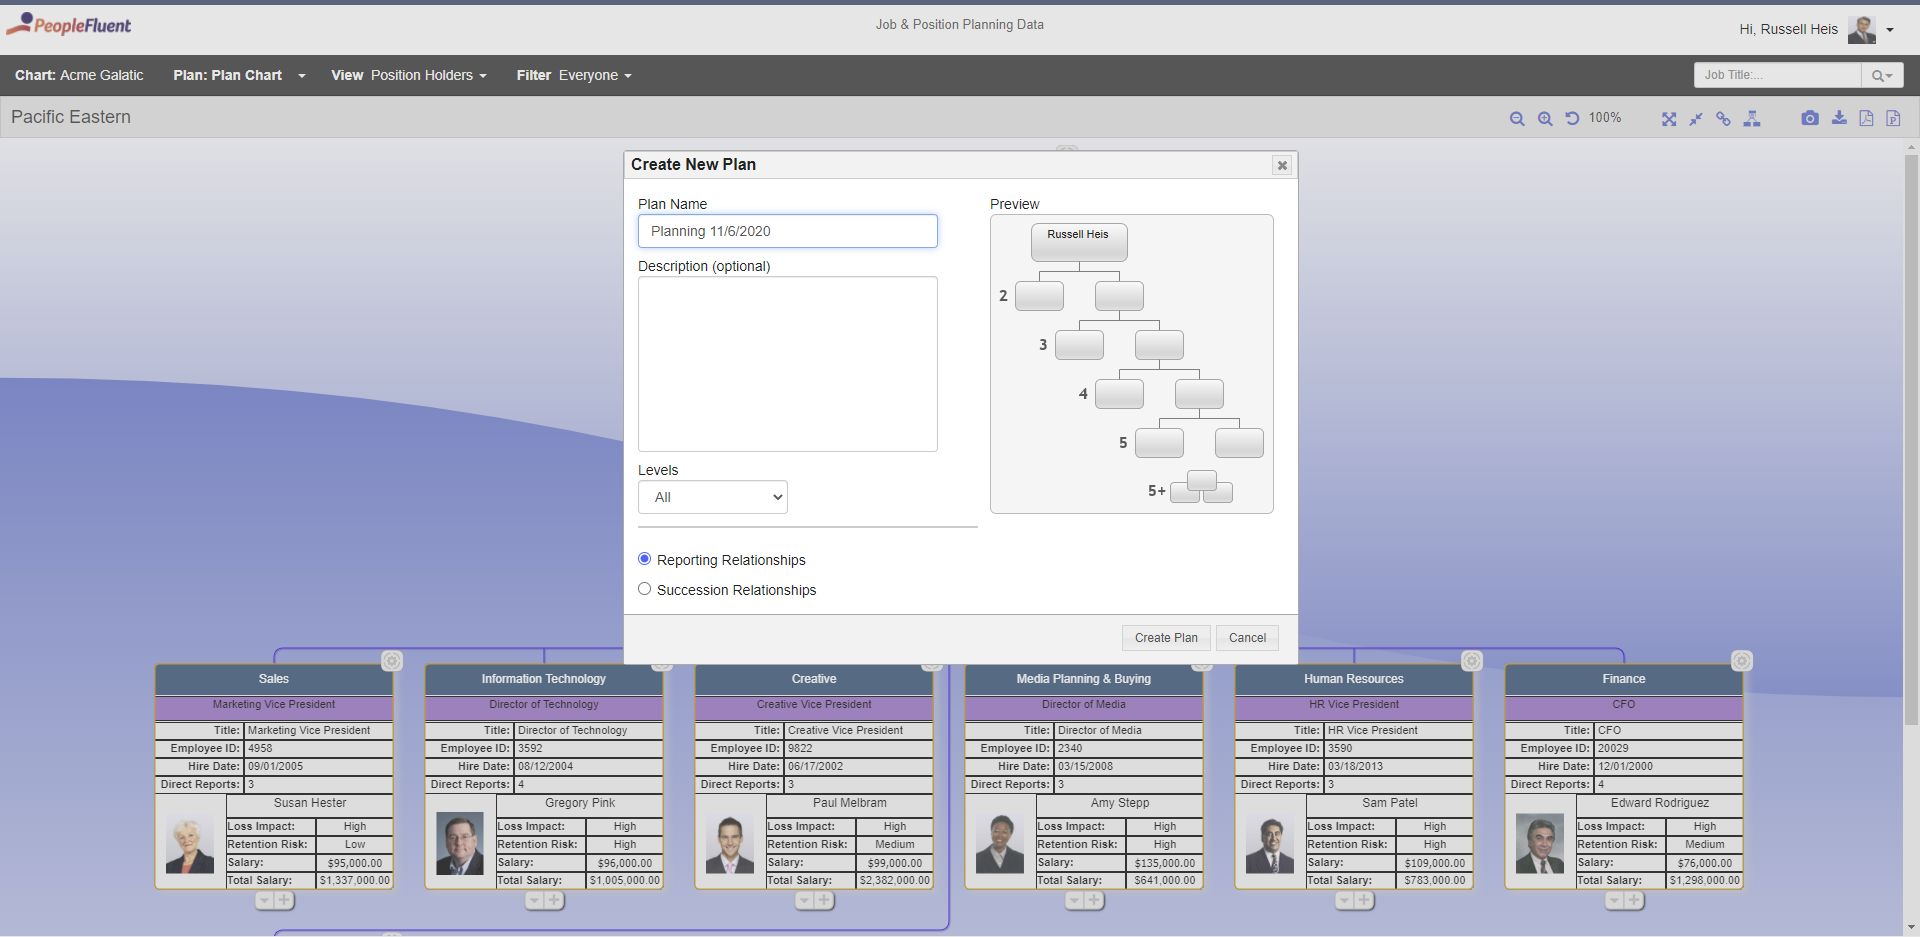 Organizational chart with an open dialogue box at the center. The dialogue box shows the options for creating a new plan using what-if planning.